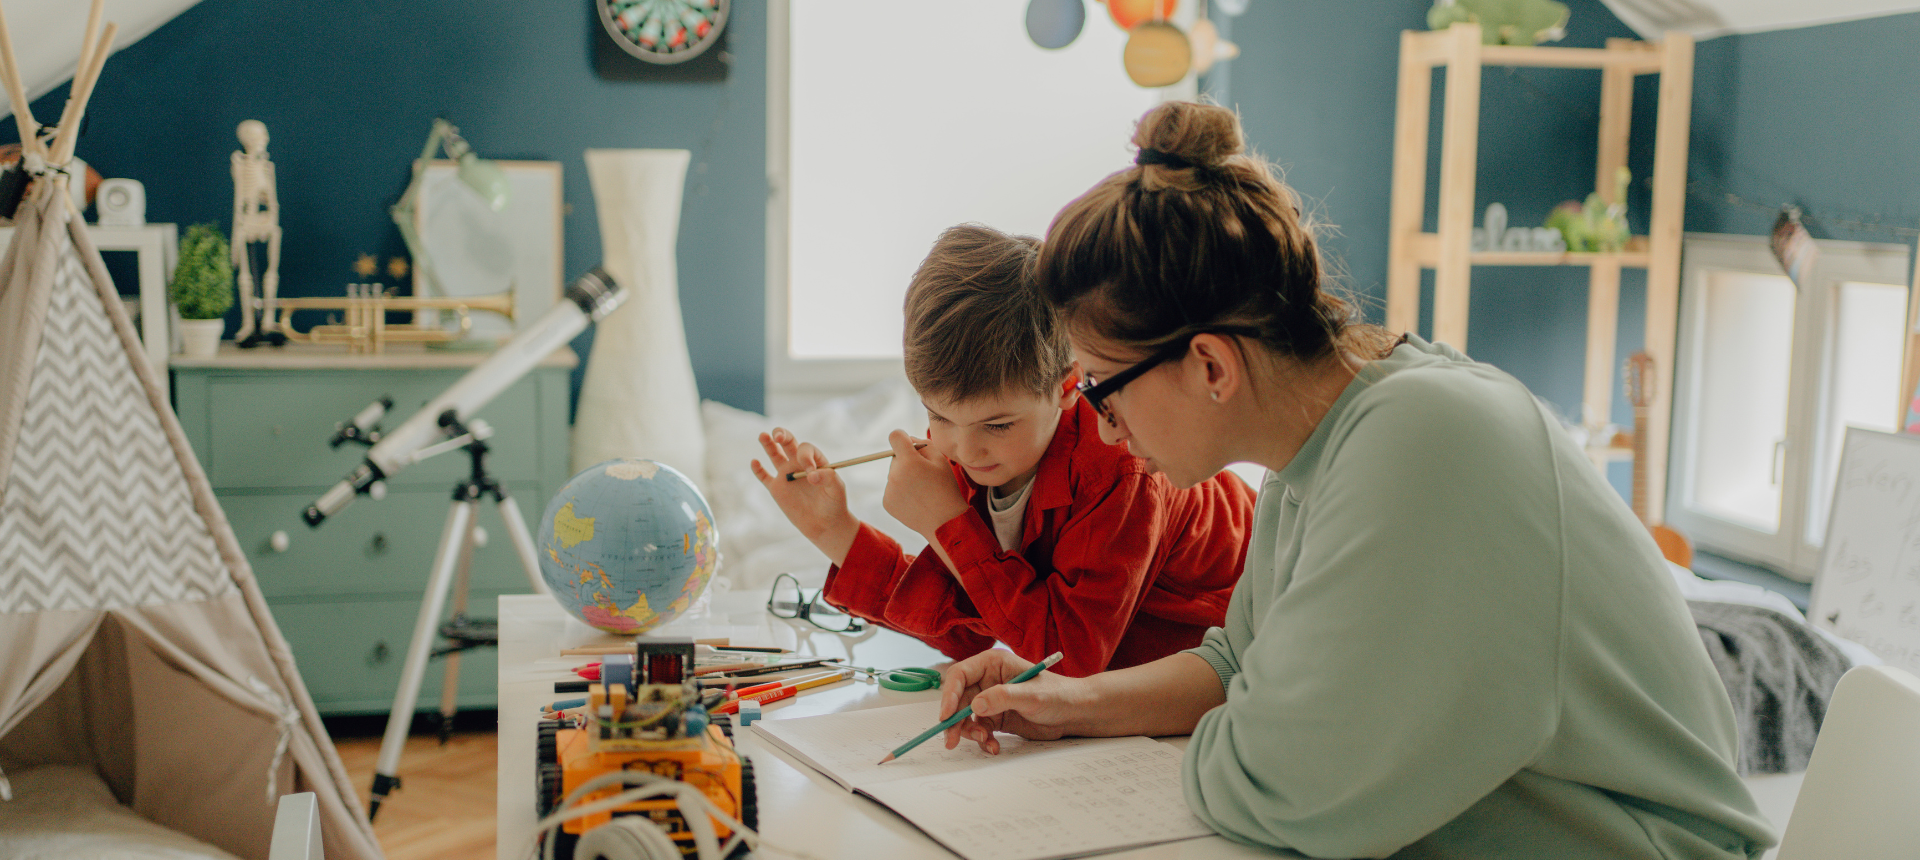 5 Myths About Home Education